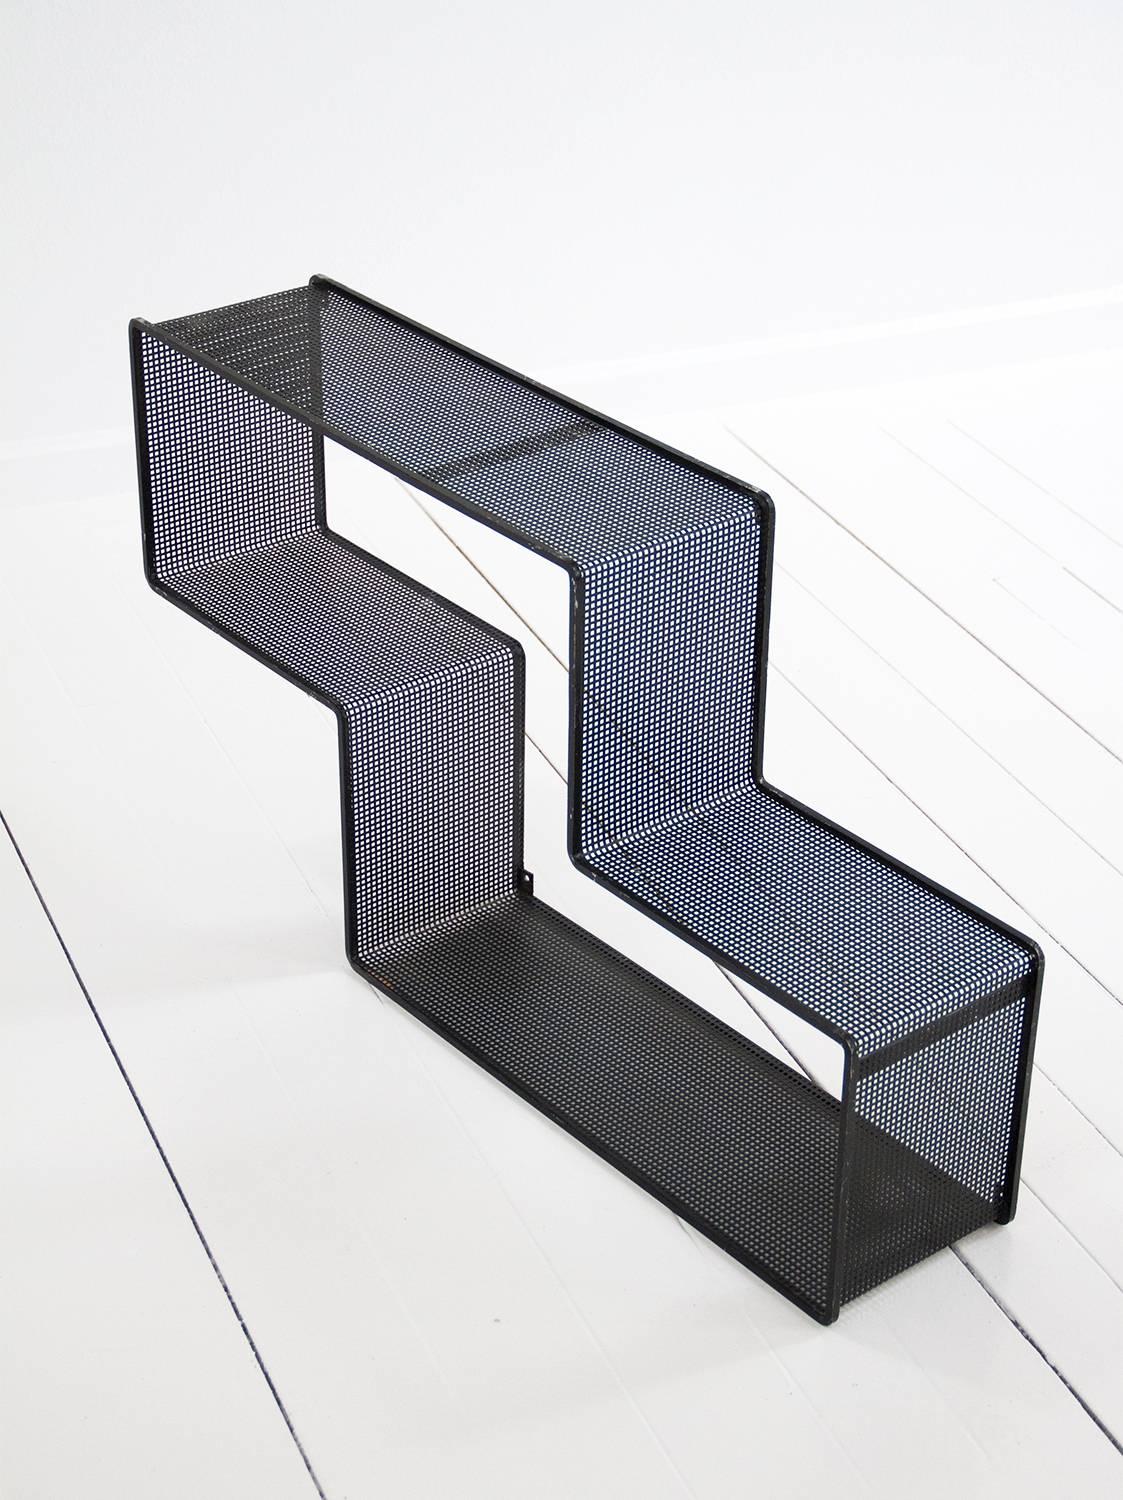 Black Dedal Wall Shelf by Mathieu Mategot, Perforated Steel, circa 1950, France For Sale 2